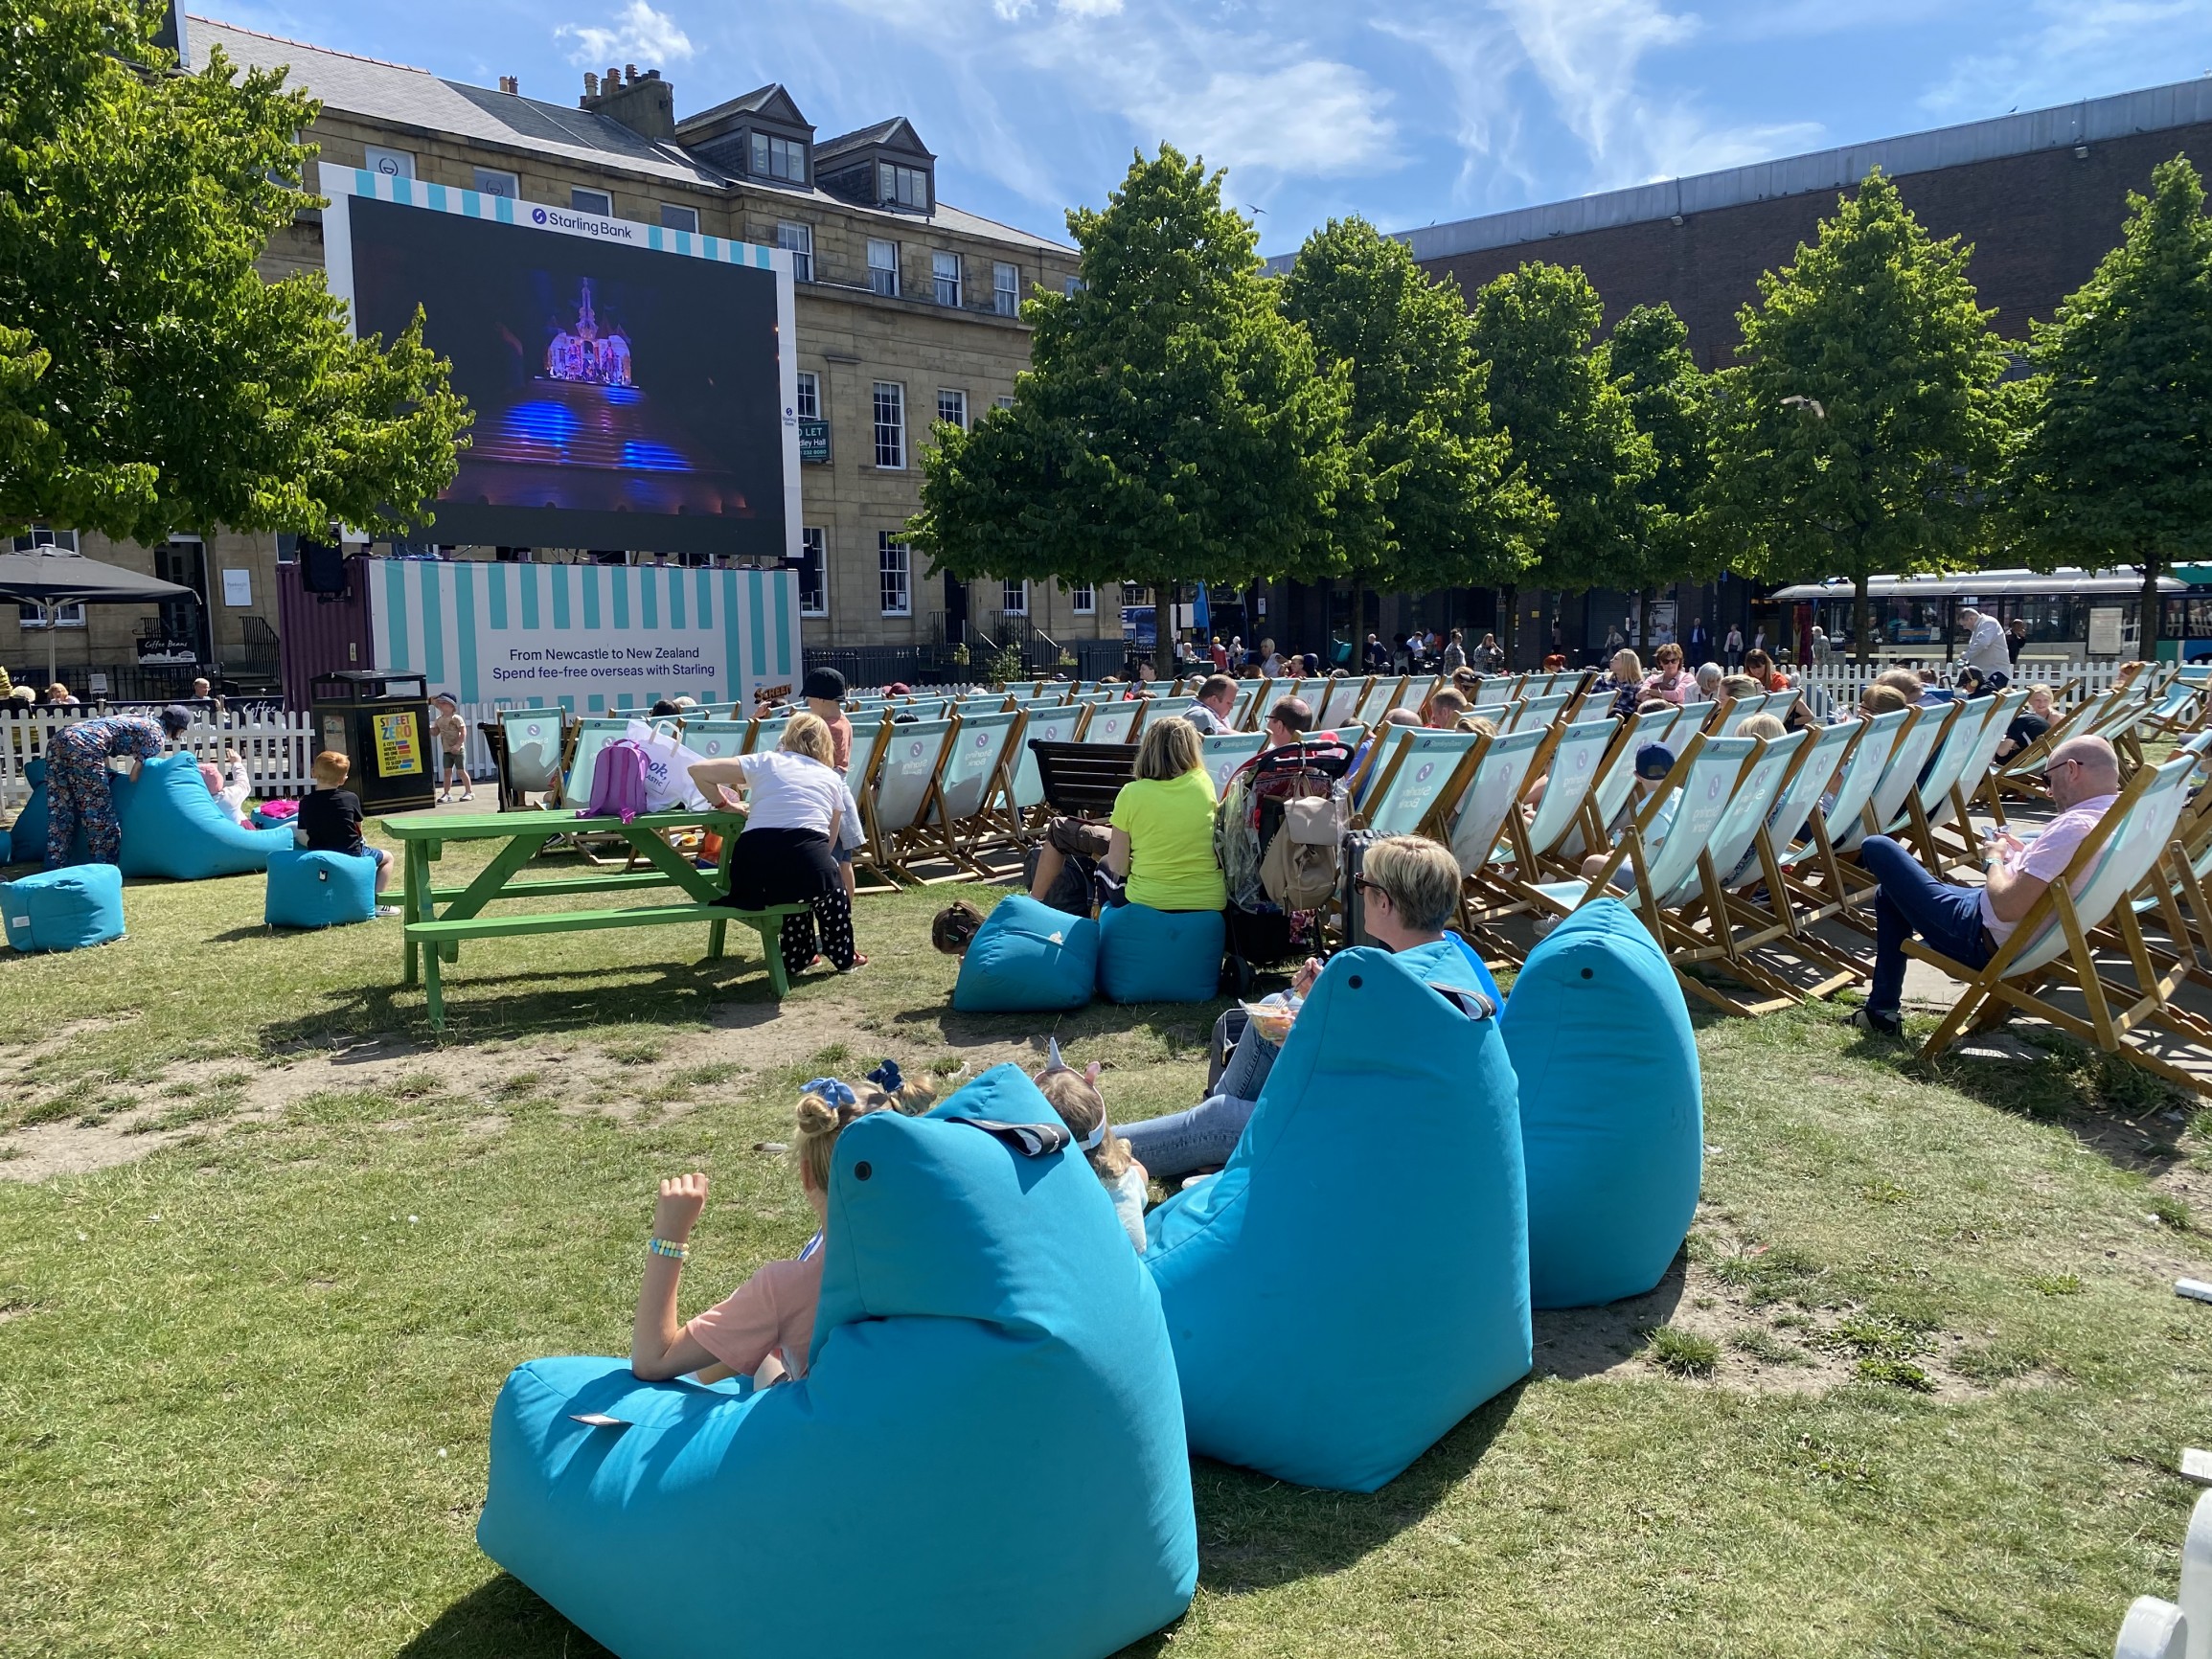 Screen on the Green at Old Eldon Square